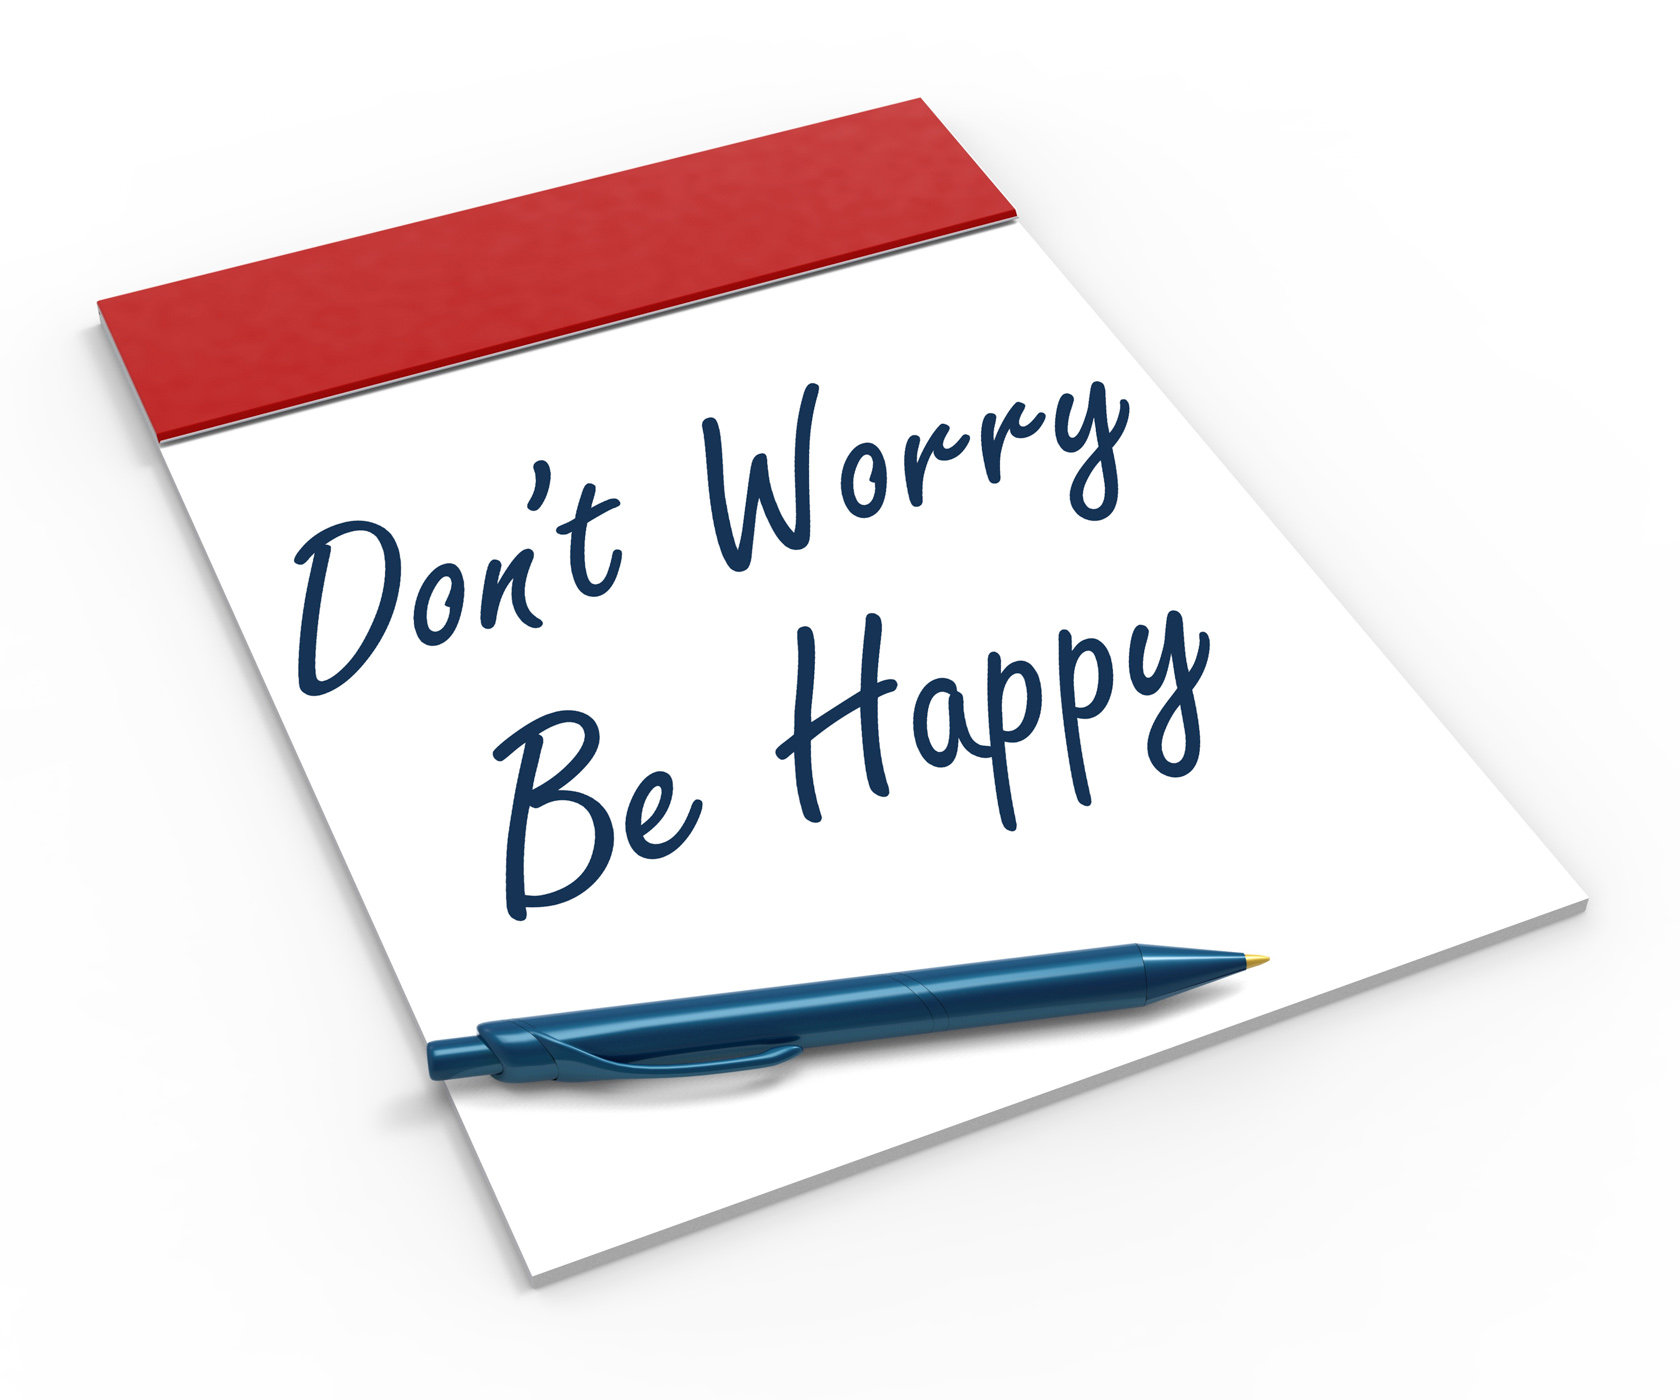 Dont worry be happy notebook shows relaxation and happiness photo